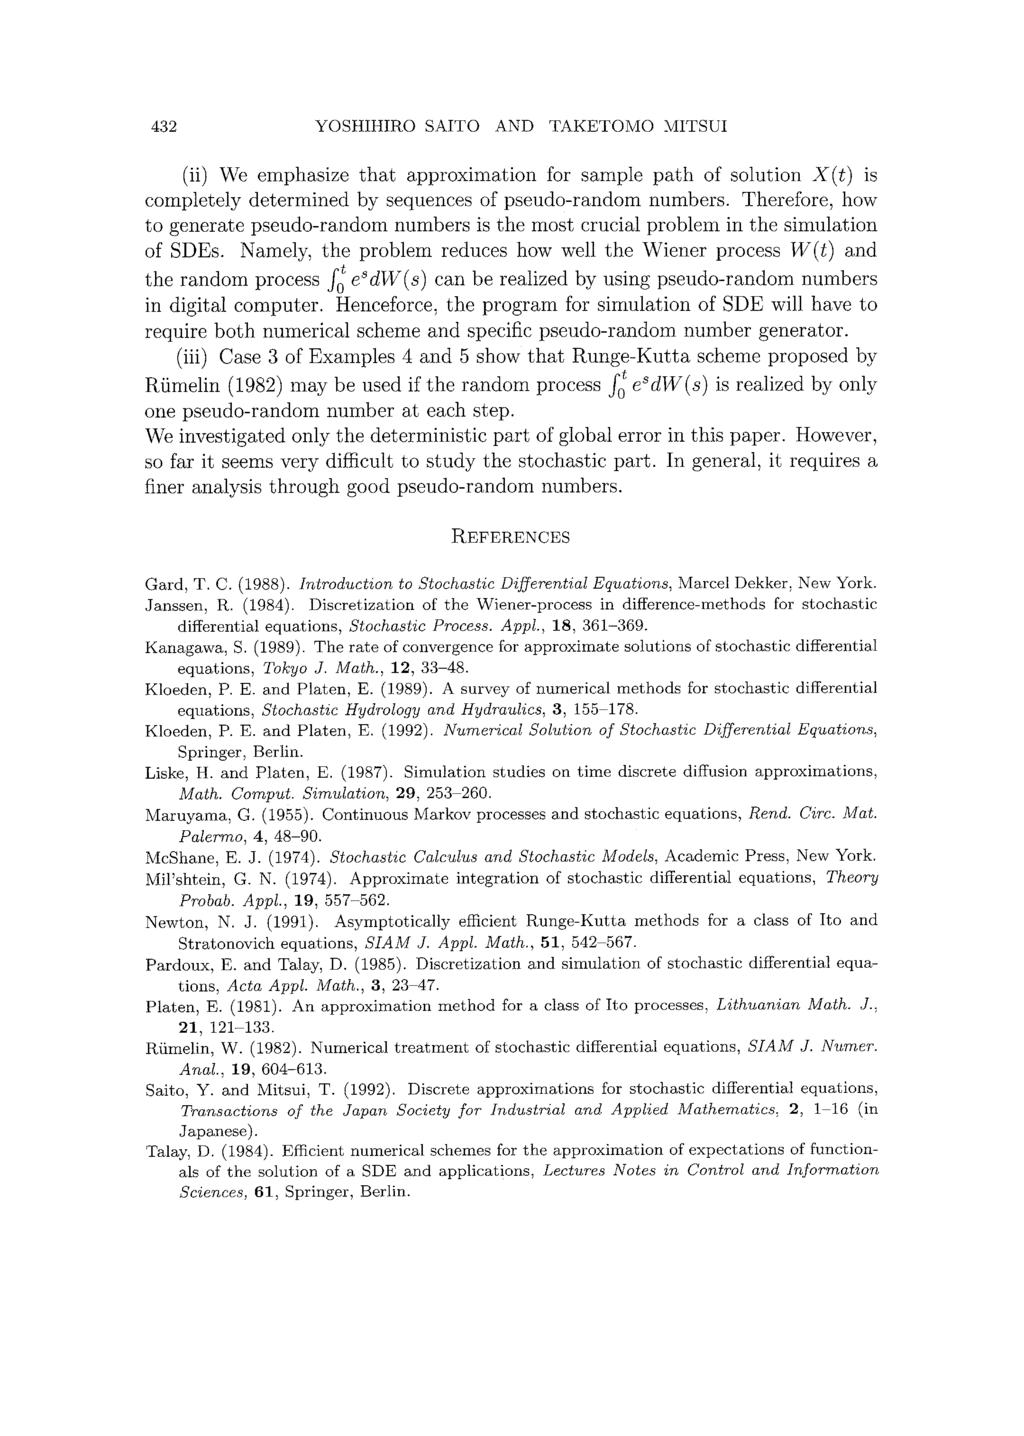 432 YOSHIHIRO SAITO AND TAKETOMO MITSUI (ii) We emphasize that approximation for sample path of solution X(t) is completely determined by sequences of pseudo-random numbers.